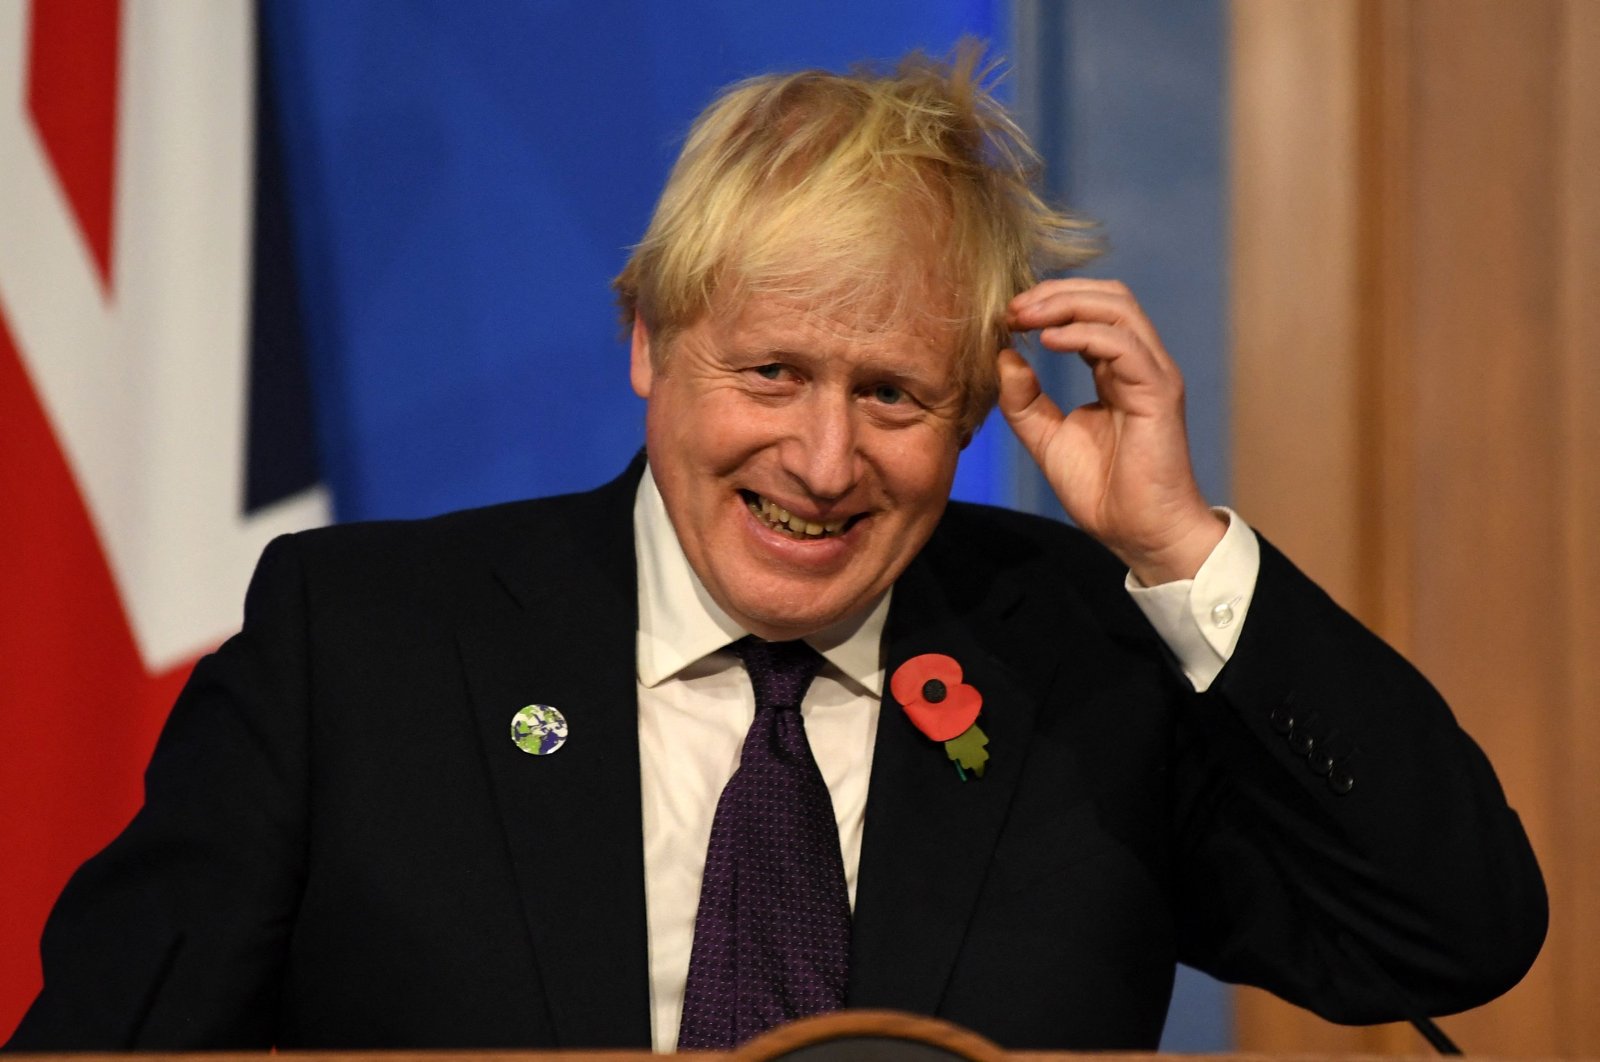 Britain's Prime Minister Boris Johnson smiles during a press conference inside the Downing Street Briefing Room in central London, U.K., Nov. 14, 2021. (AFP Photo)